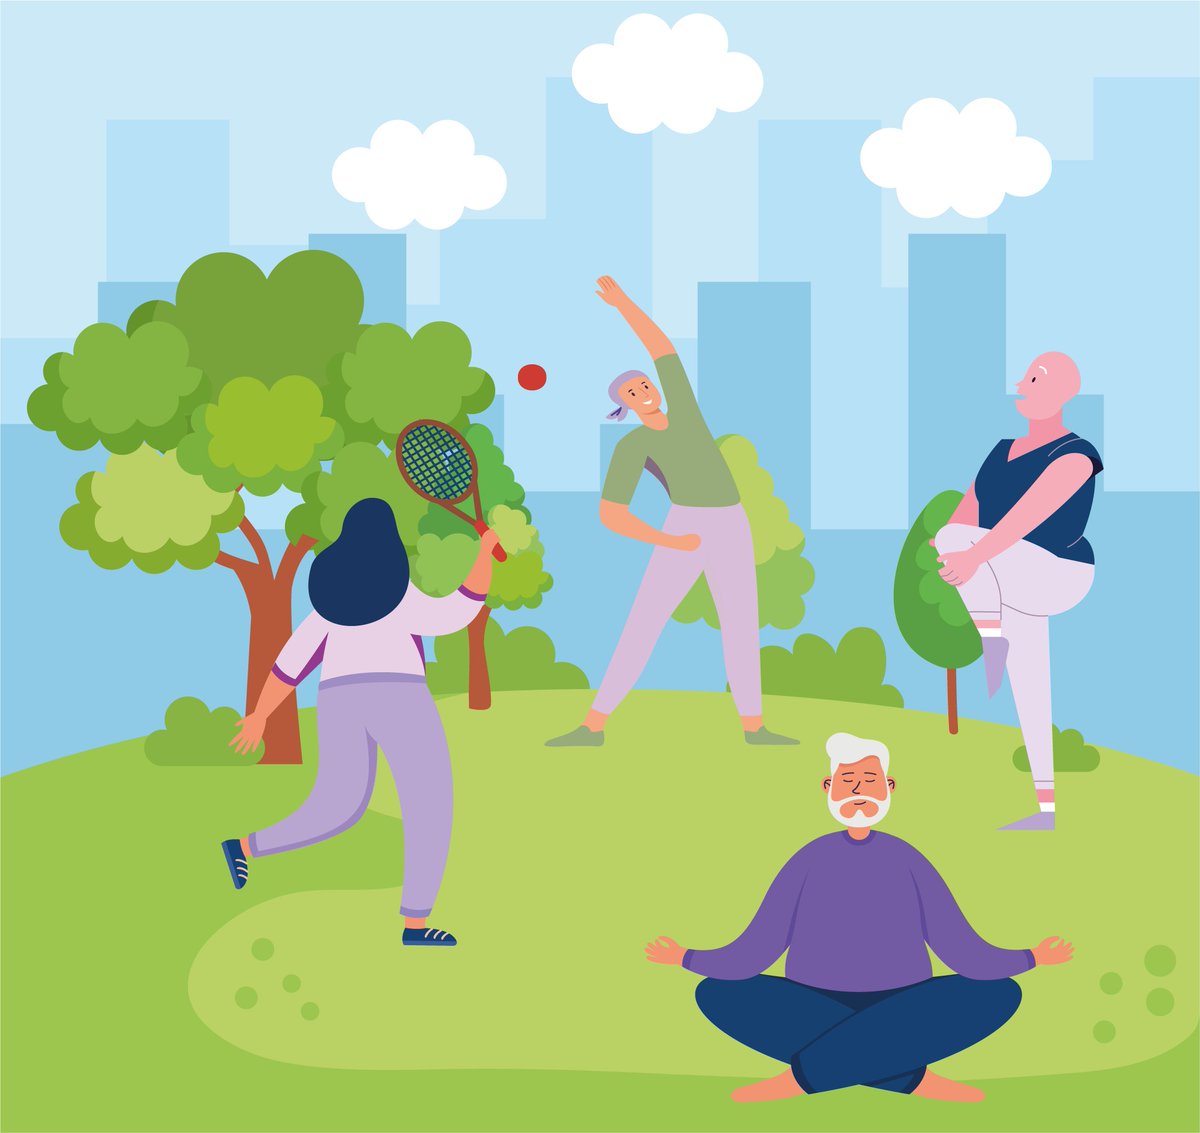 Learn about additional health and well-being benefits from the @UcanAct project's cancer-preventive #PhysicalActivity sessions in public urban #green 🌳spaces ucanact.org/greenspacesand… #CancerPrevention #EuropeanMentalHealthWeek